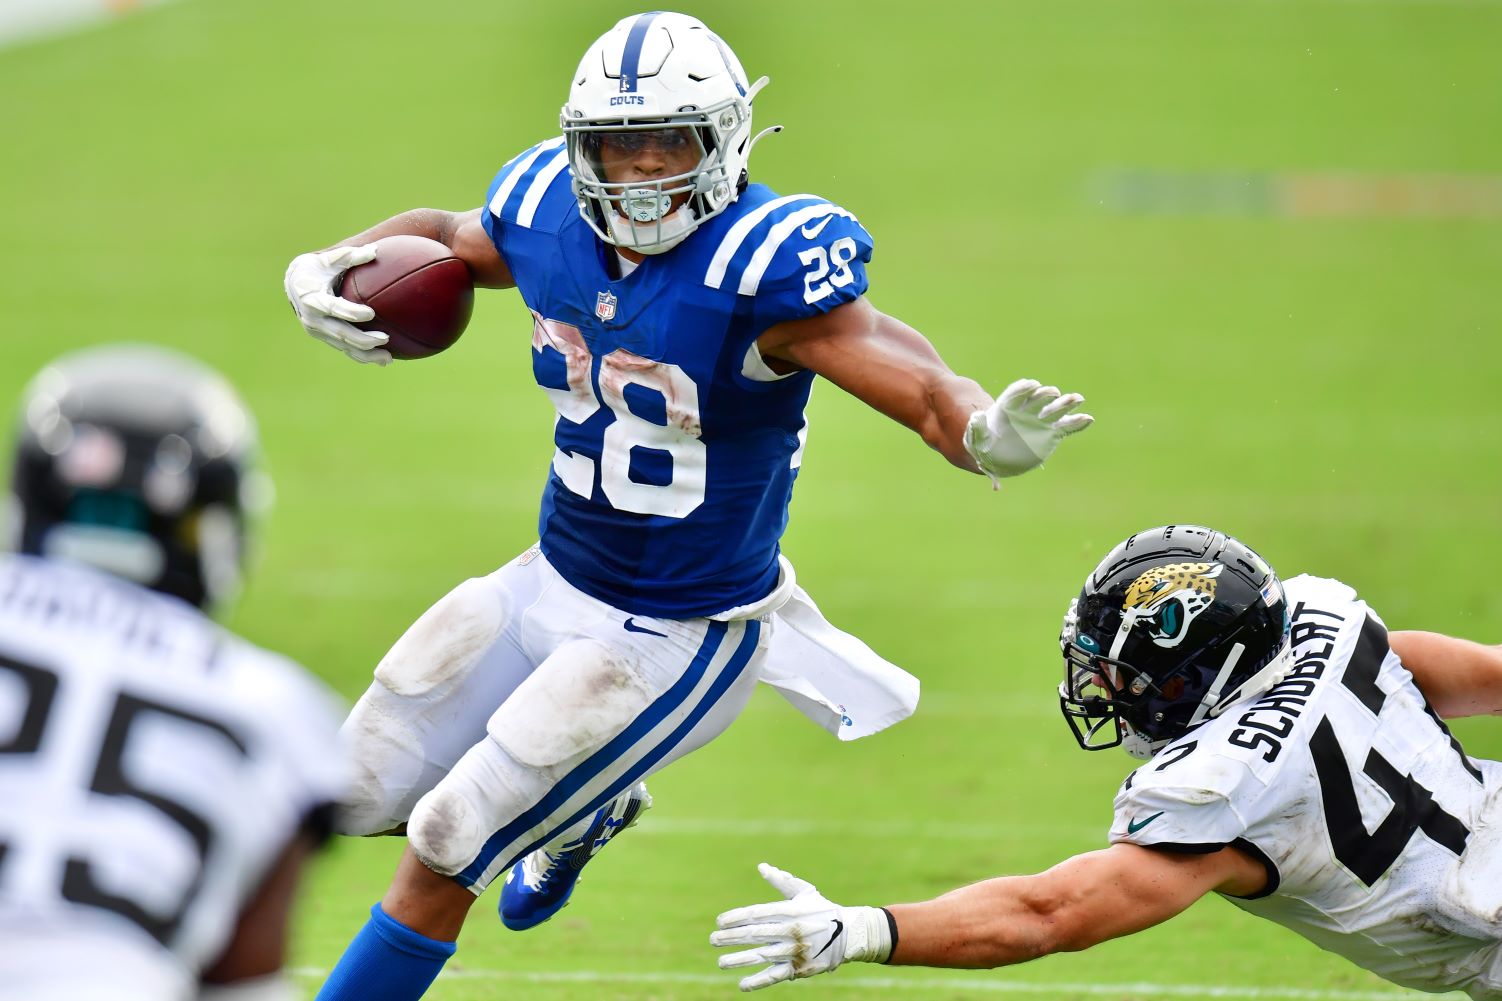 With Jonathan Taylor landing on the reserve/COVID-19 list, the Indianapolis Colts won't have their best weapon available against the Titans.